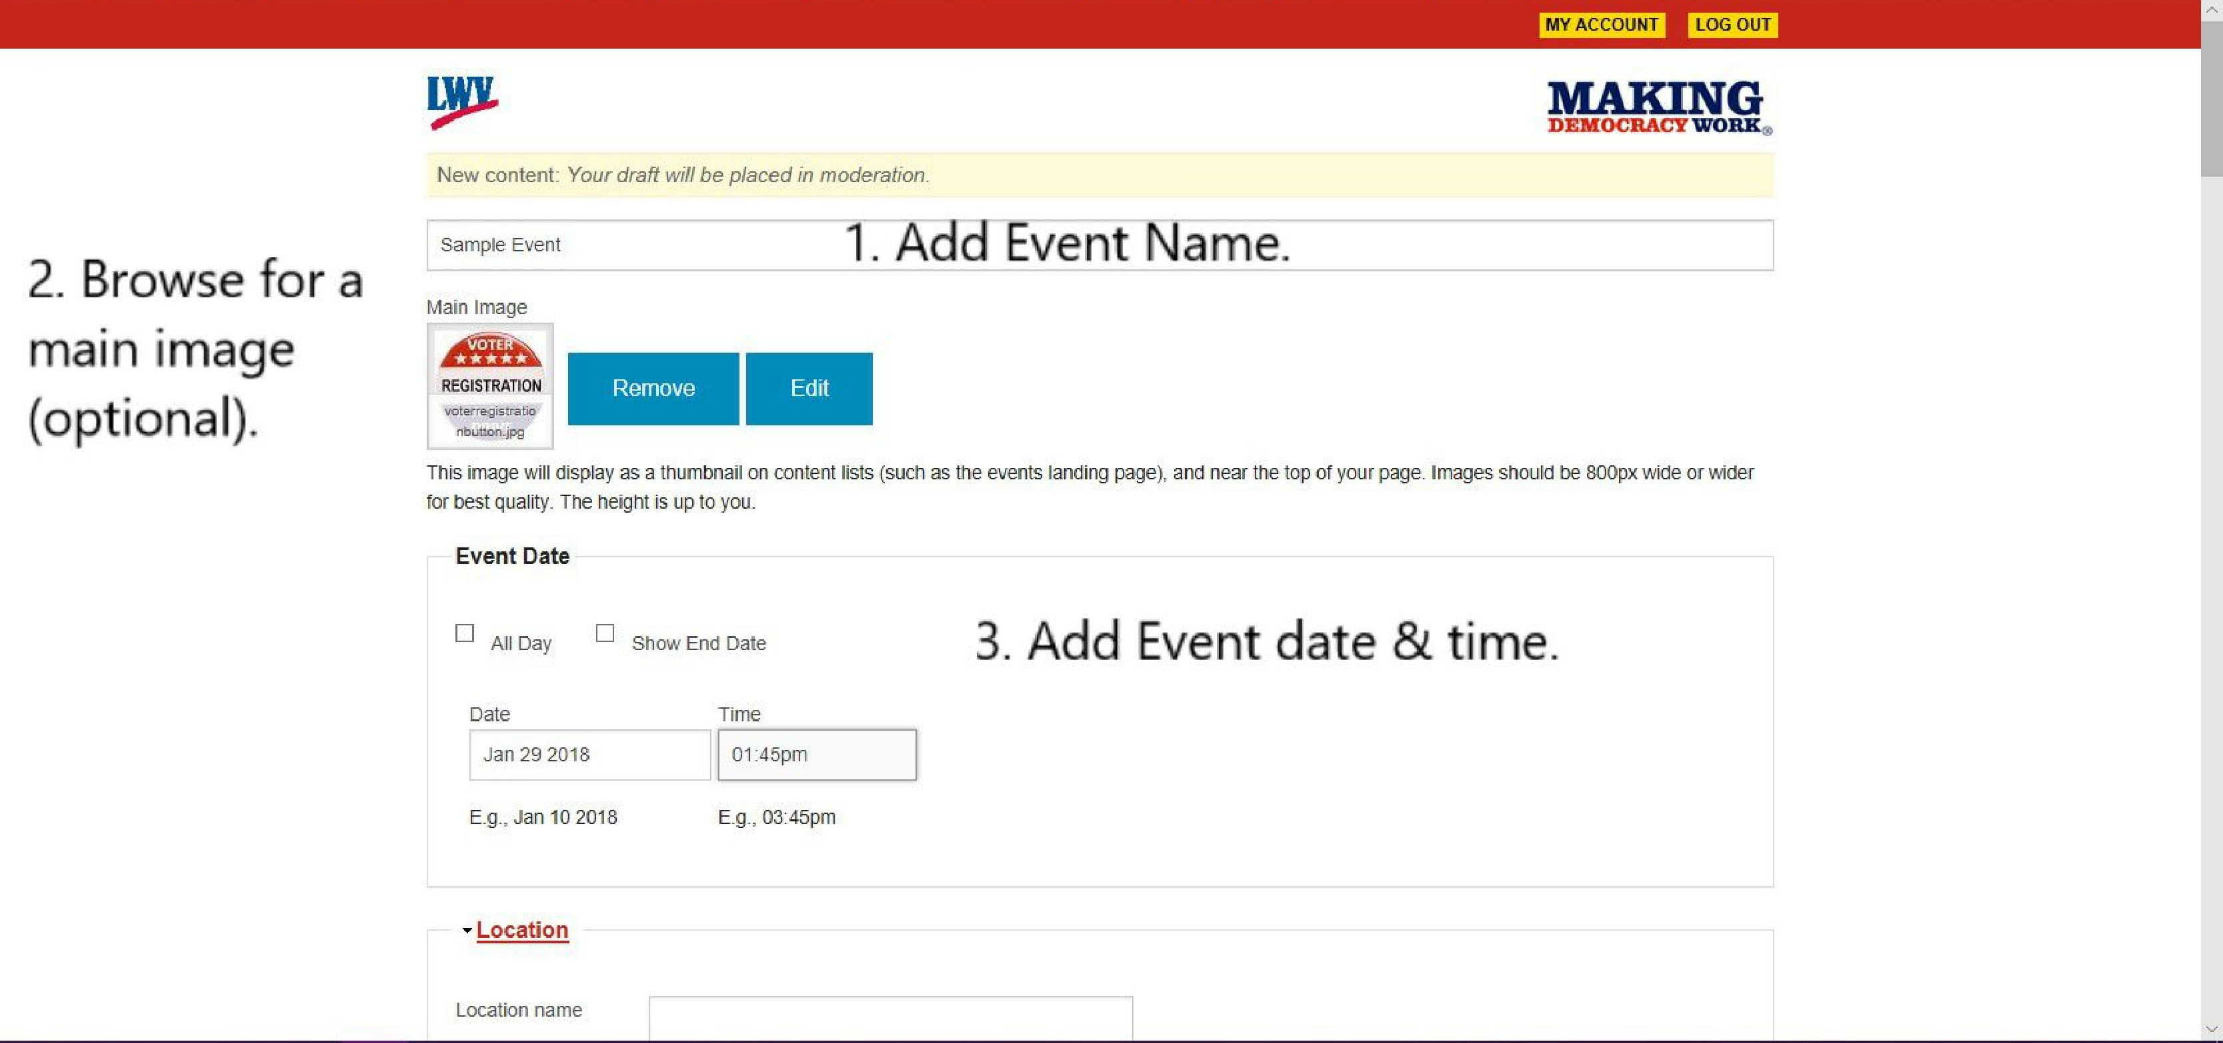 Add Event - add title, main image, &amp;amp; date/time